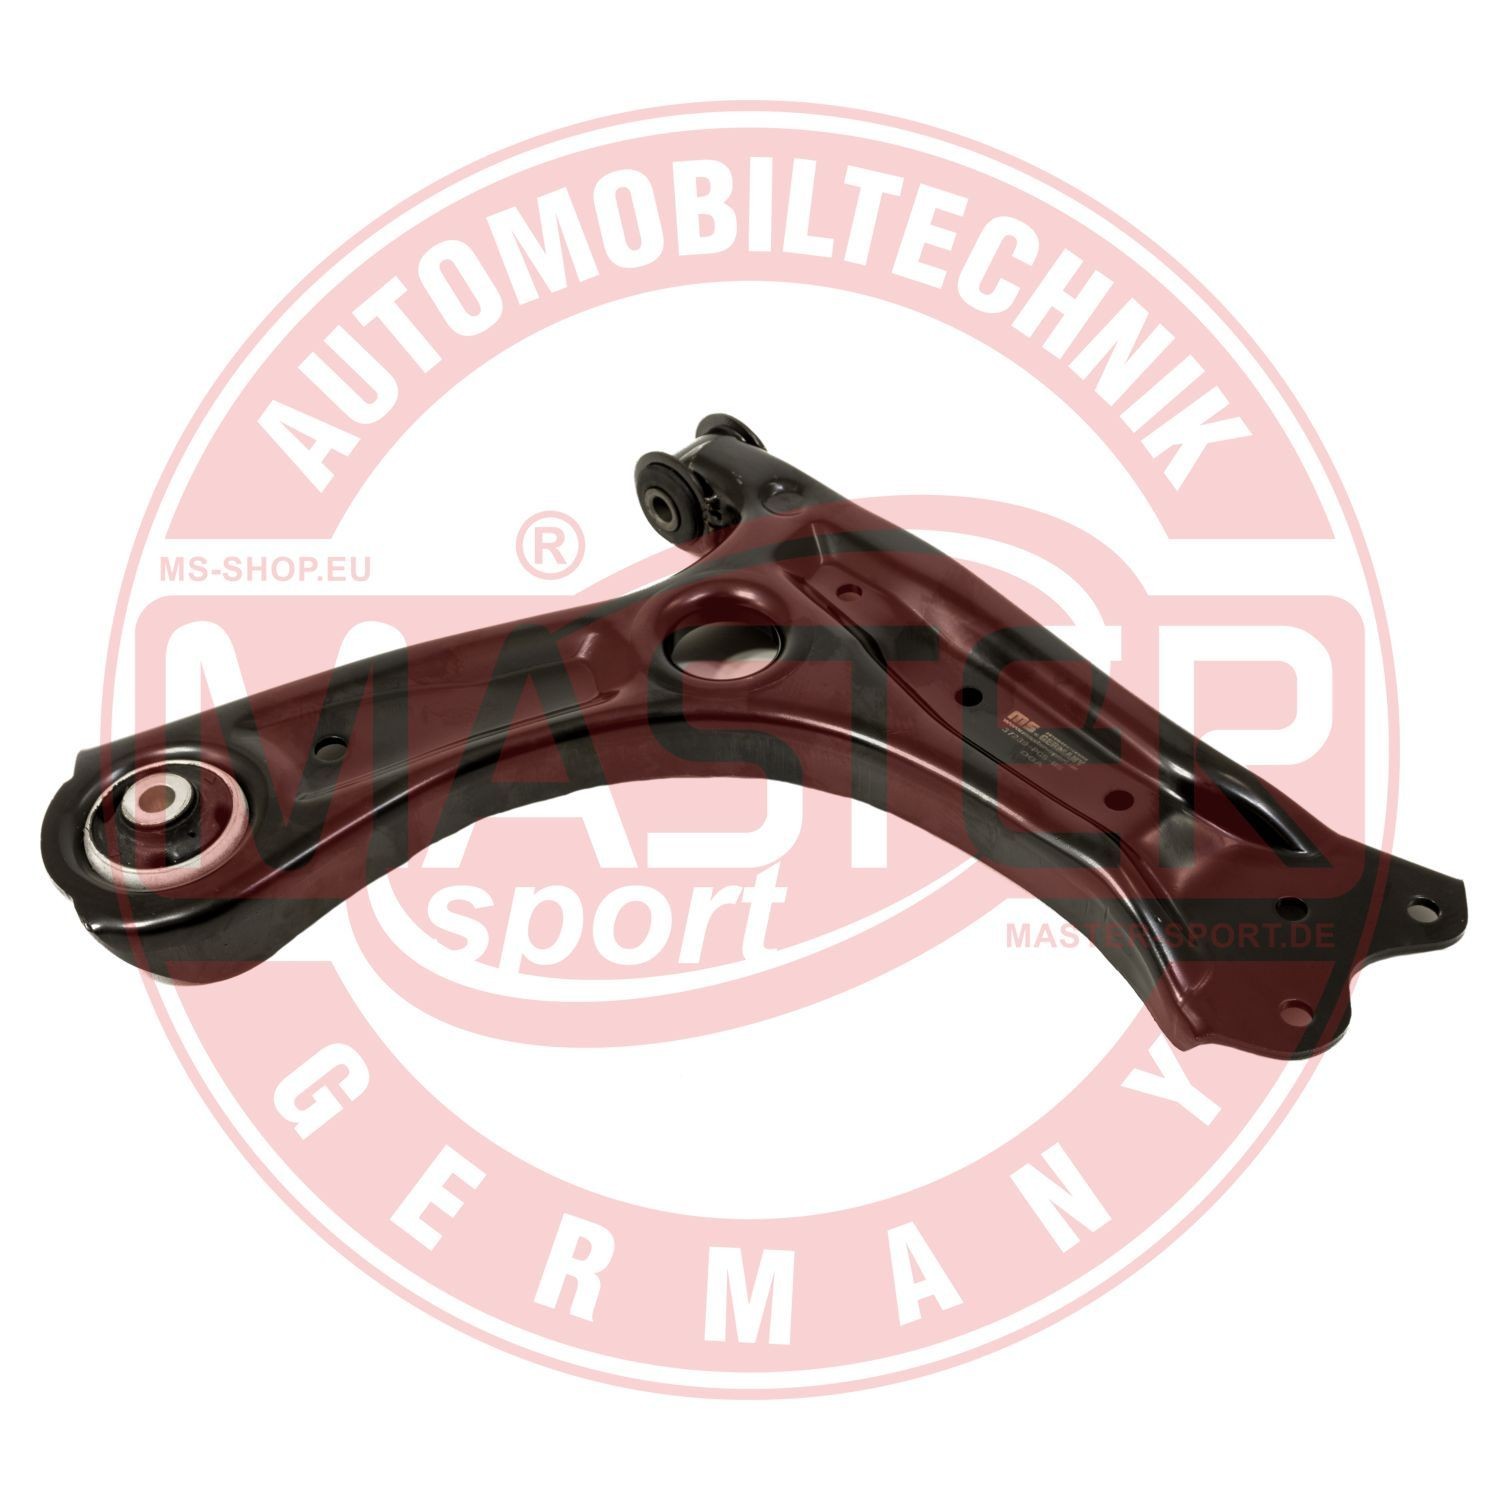 MASTER-SPORT Control arm rear and front VW Polo Mk5 new 37239-PCS-MS